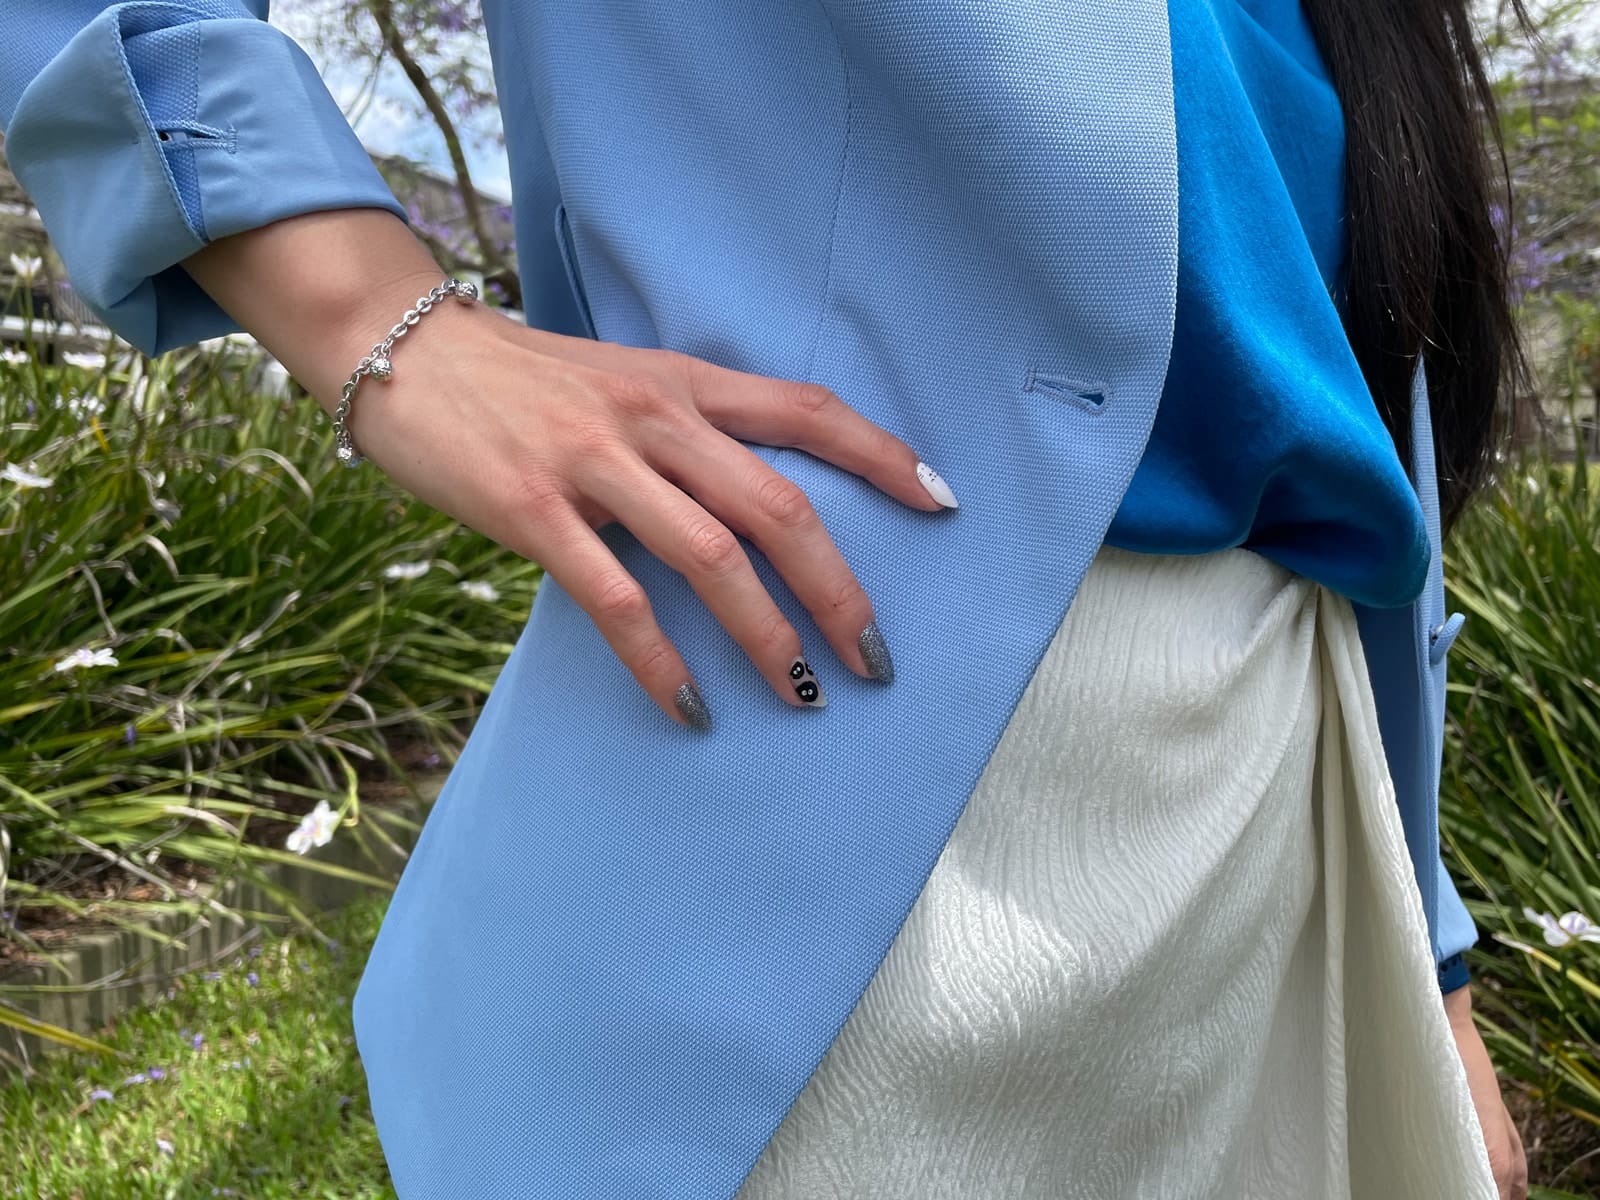 A close-up of a woman’s hand on her hip. She is wearing a blue blazer and a white skirt. Her nails have nail art of Totoro